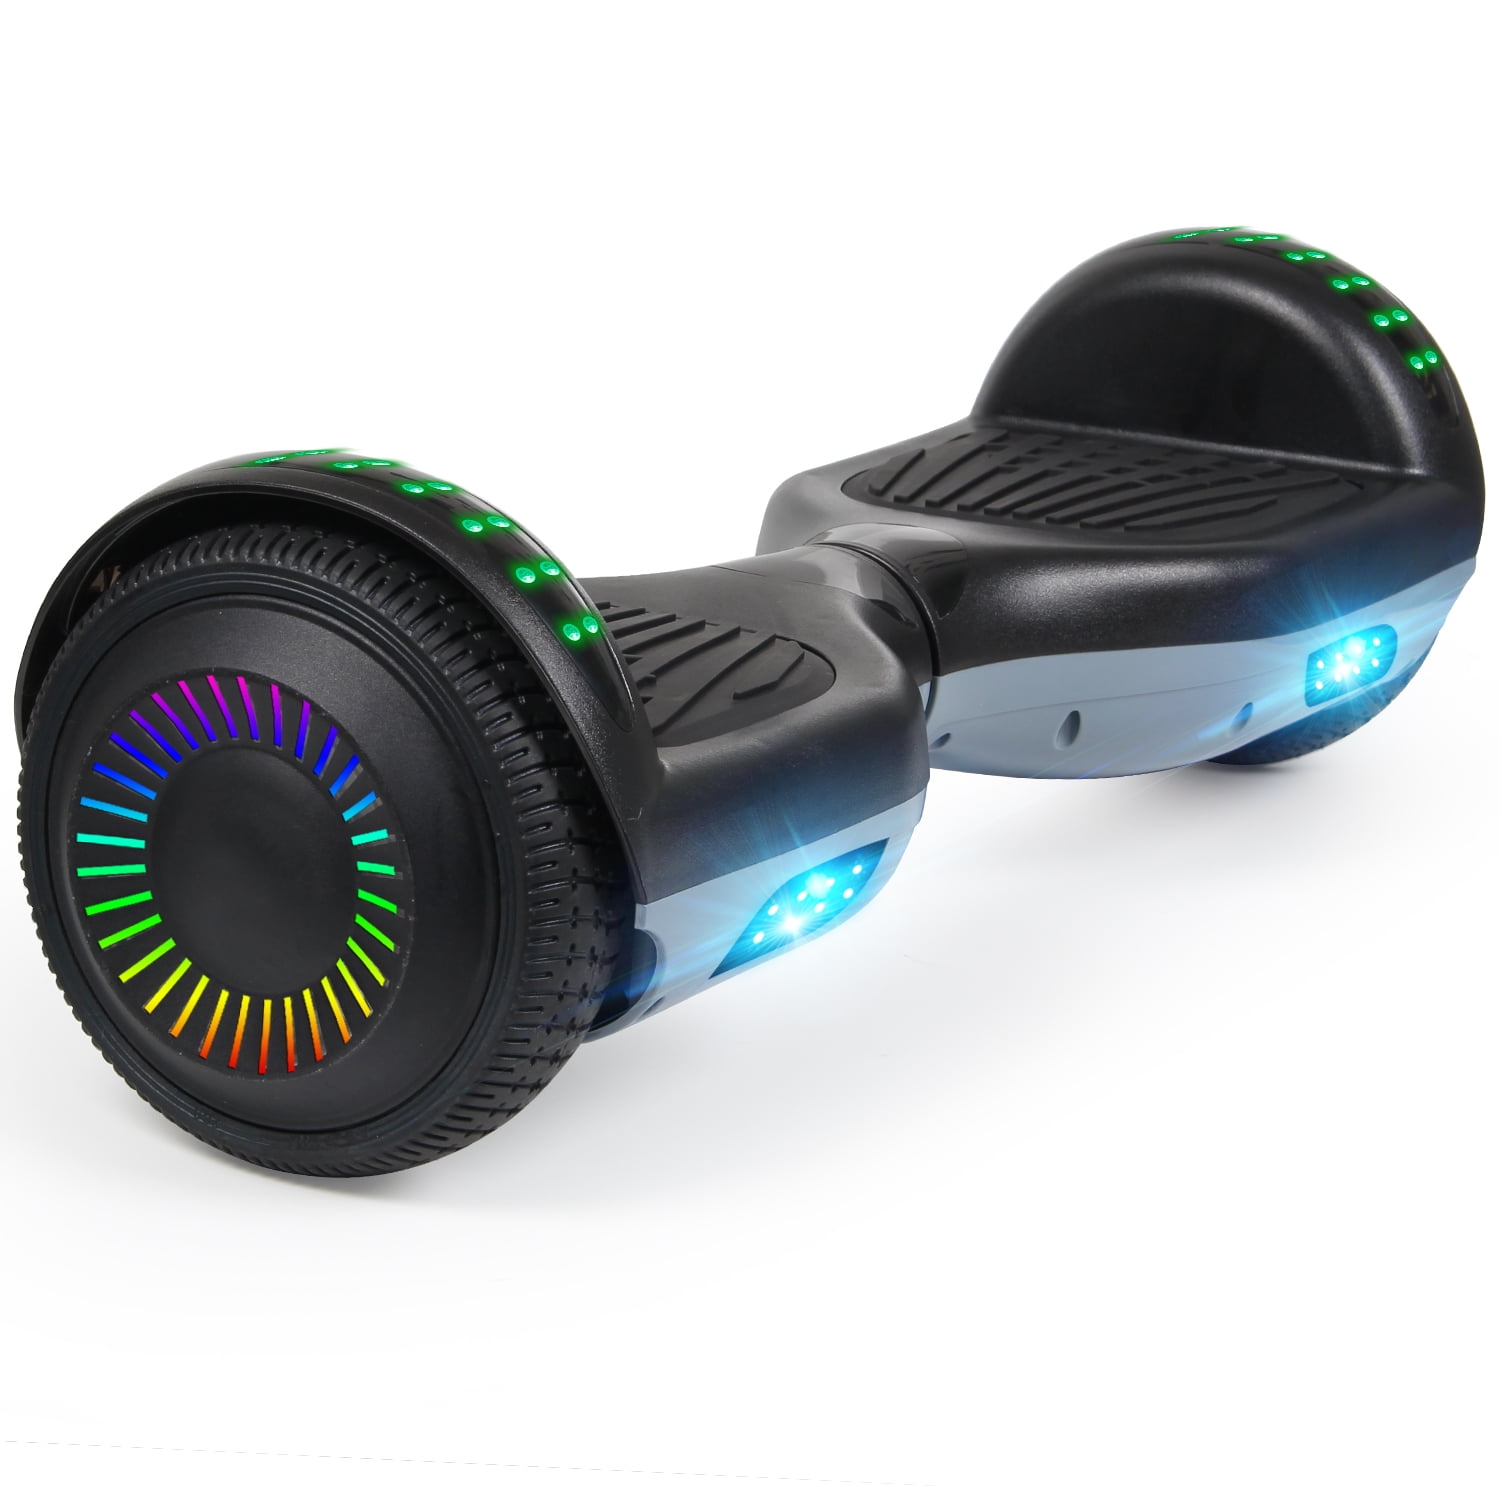 CBD 6.5 Hoverboard for Kids UL2272 Certified Two Wheels Self-Balancing Electric Scooter with Bluetooth and LED Lights,Smart Hover Board Ultimate X-Graffiti